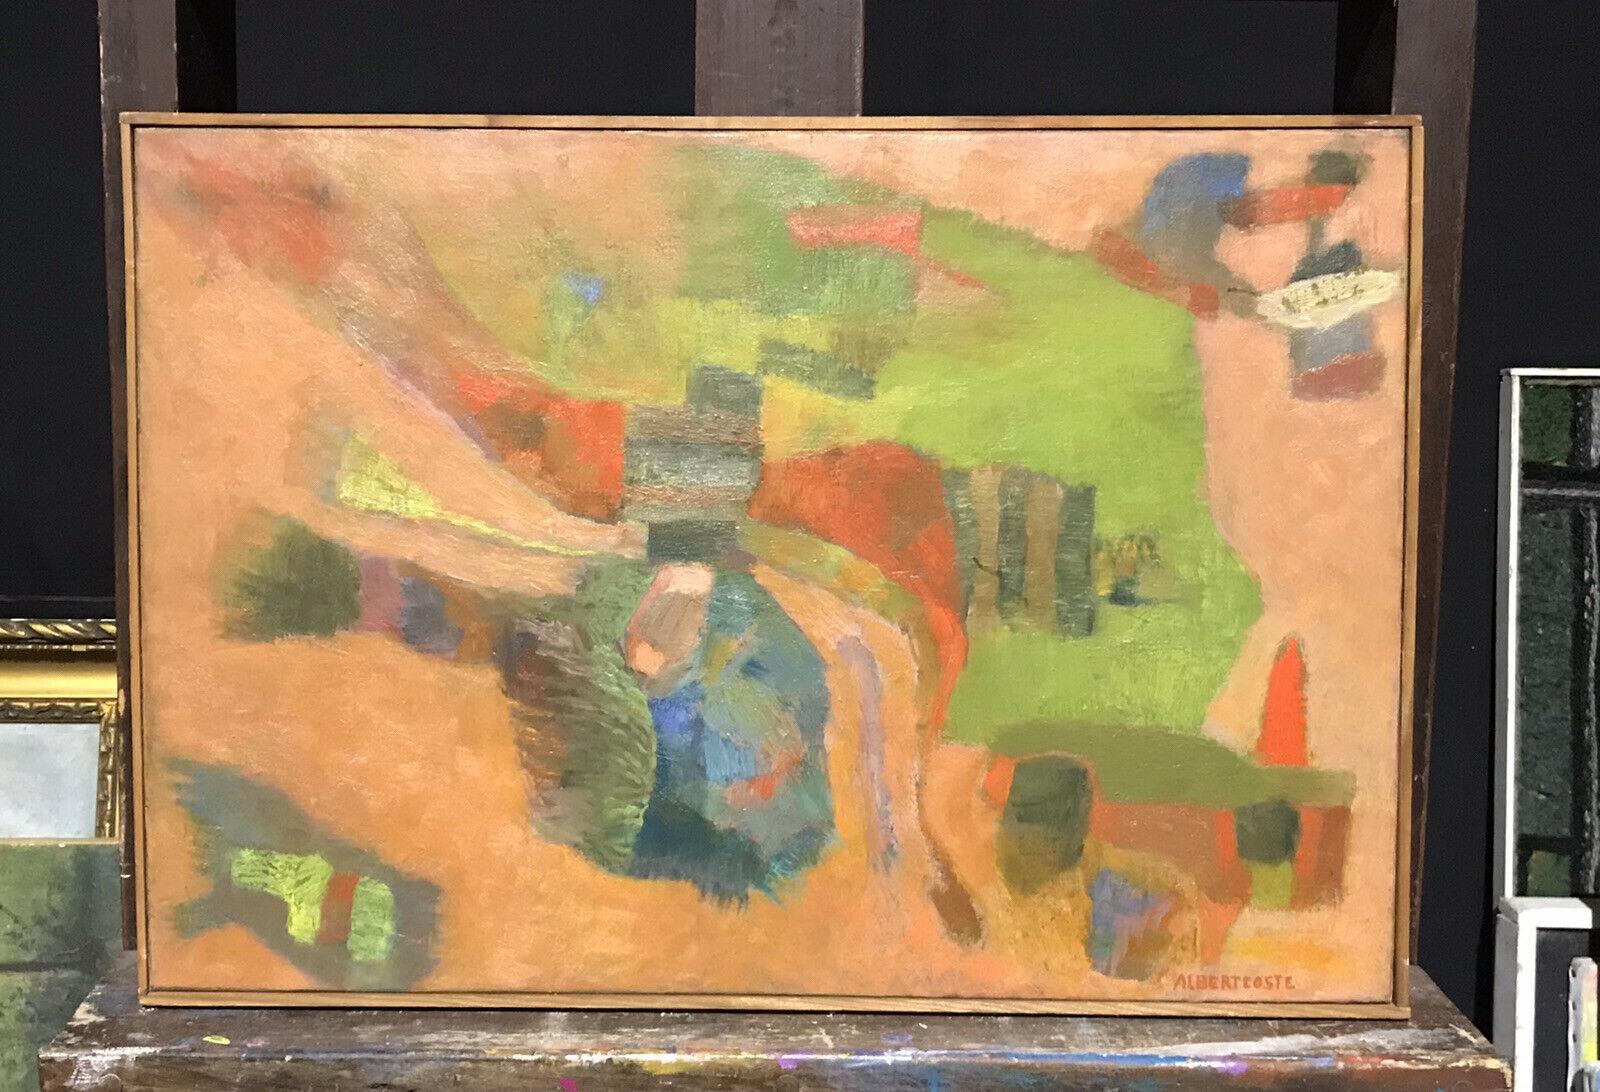 1950's SIGNED FRENCH CUBIST OIL PAINTING - BEAUTIFUL ORANGE BLUE GREEN COLORS - Painting by ALBERT COSTE (1896-1985) 